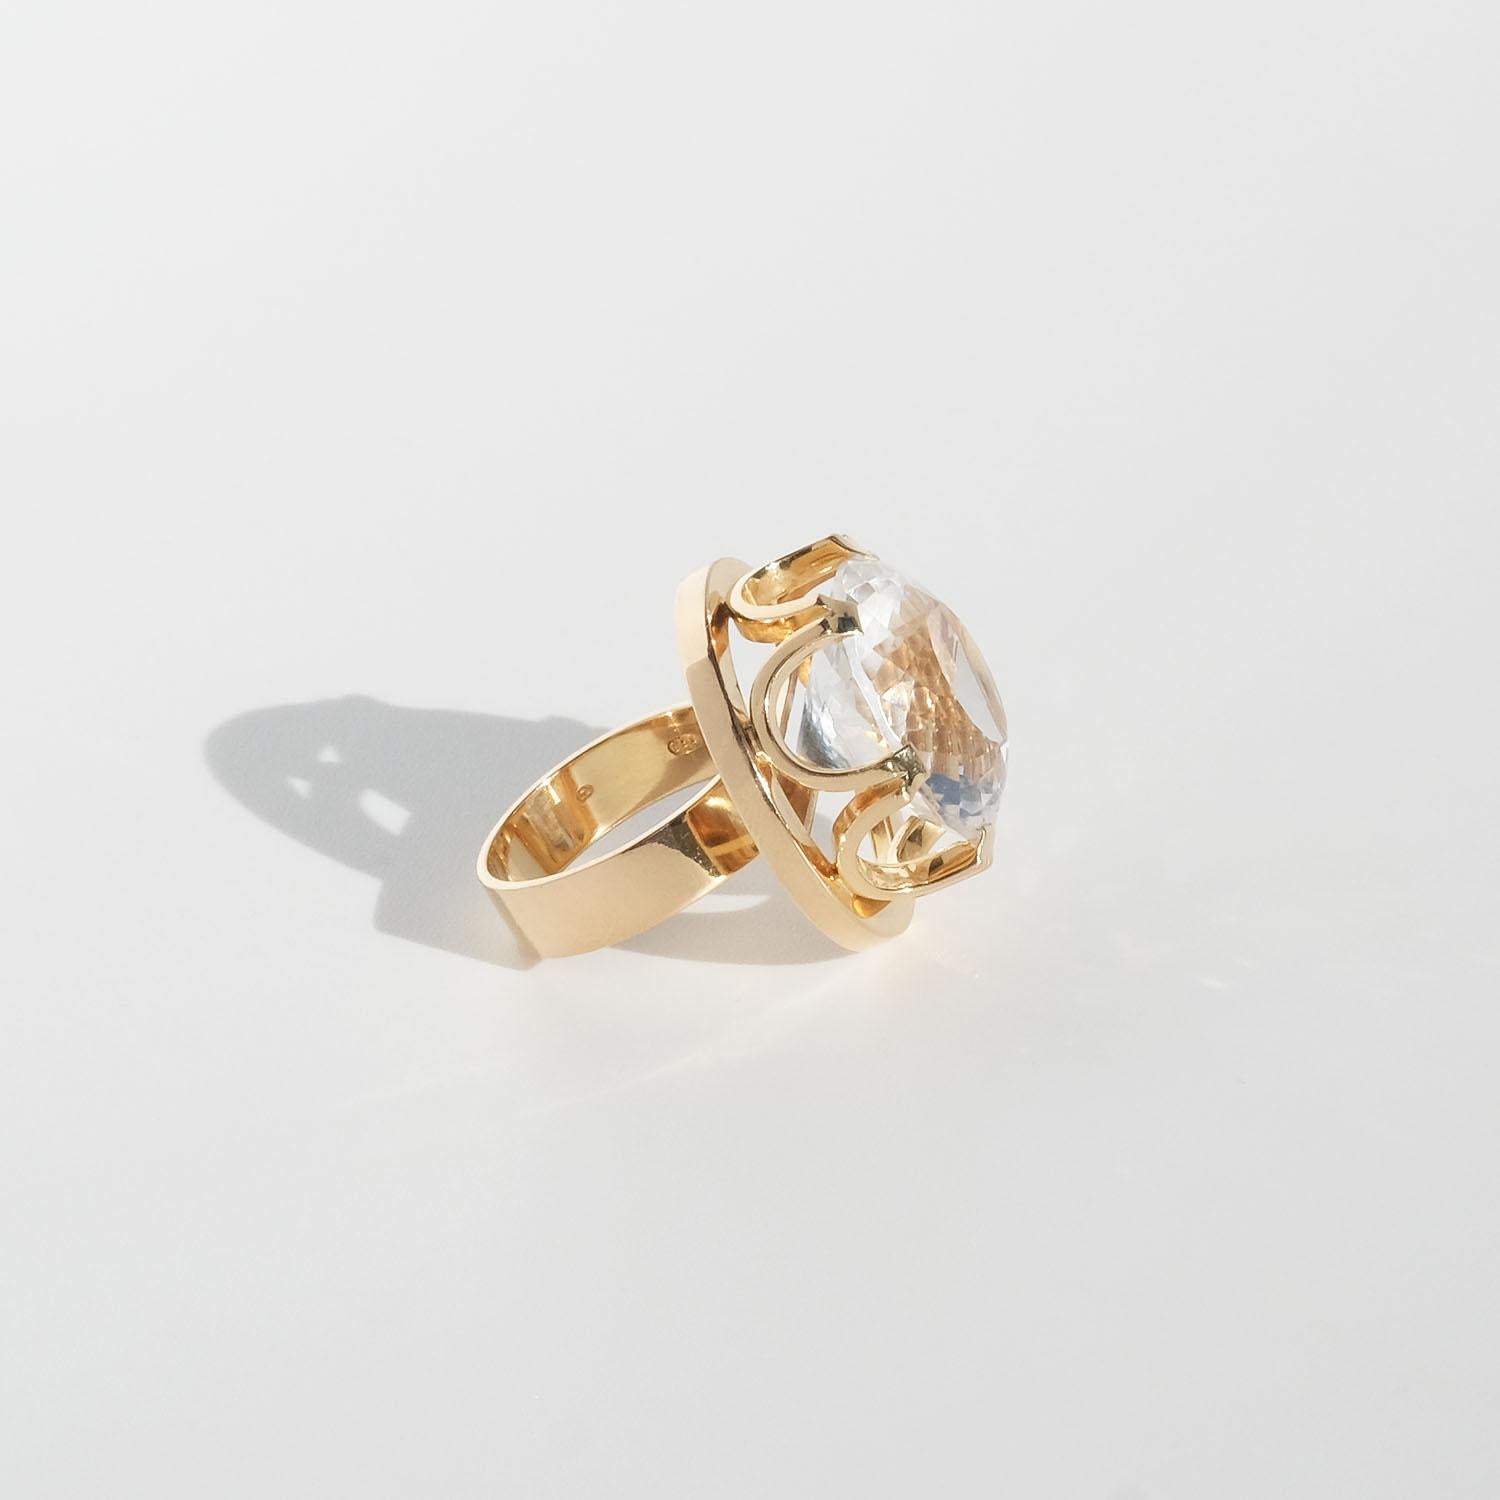 This 18 karat gold ring is adorned by a large, faceted rock crystal. The head of the stone is distinct and it is held by a prominent setting which resembles a king's crown. 

The ring is perfect for the cocktail party and any other social gathering.